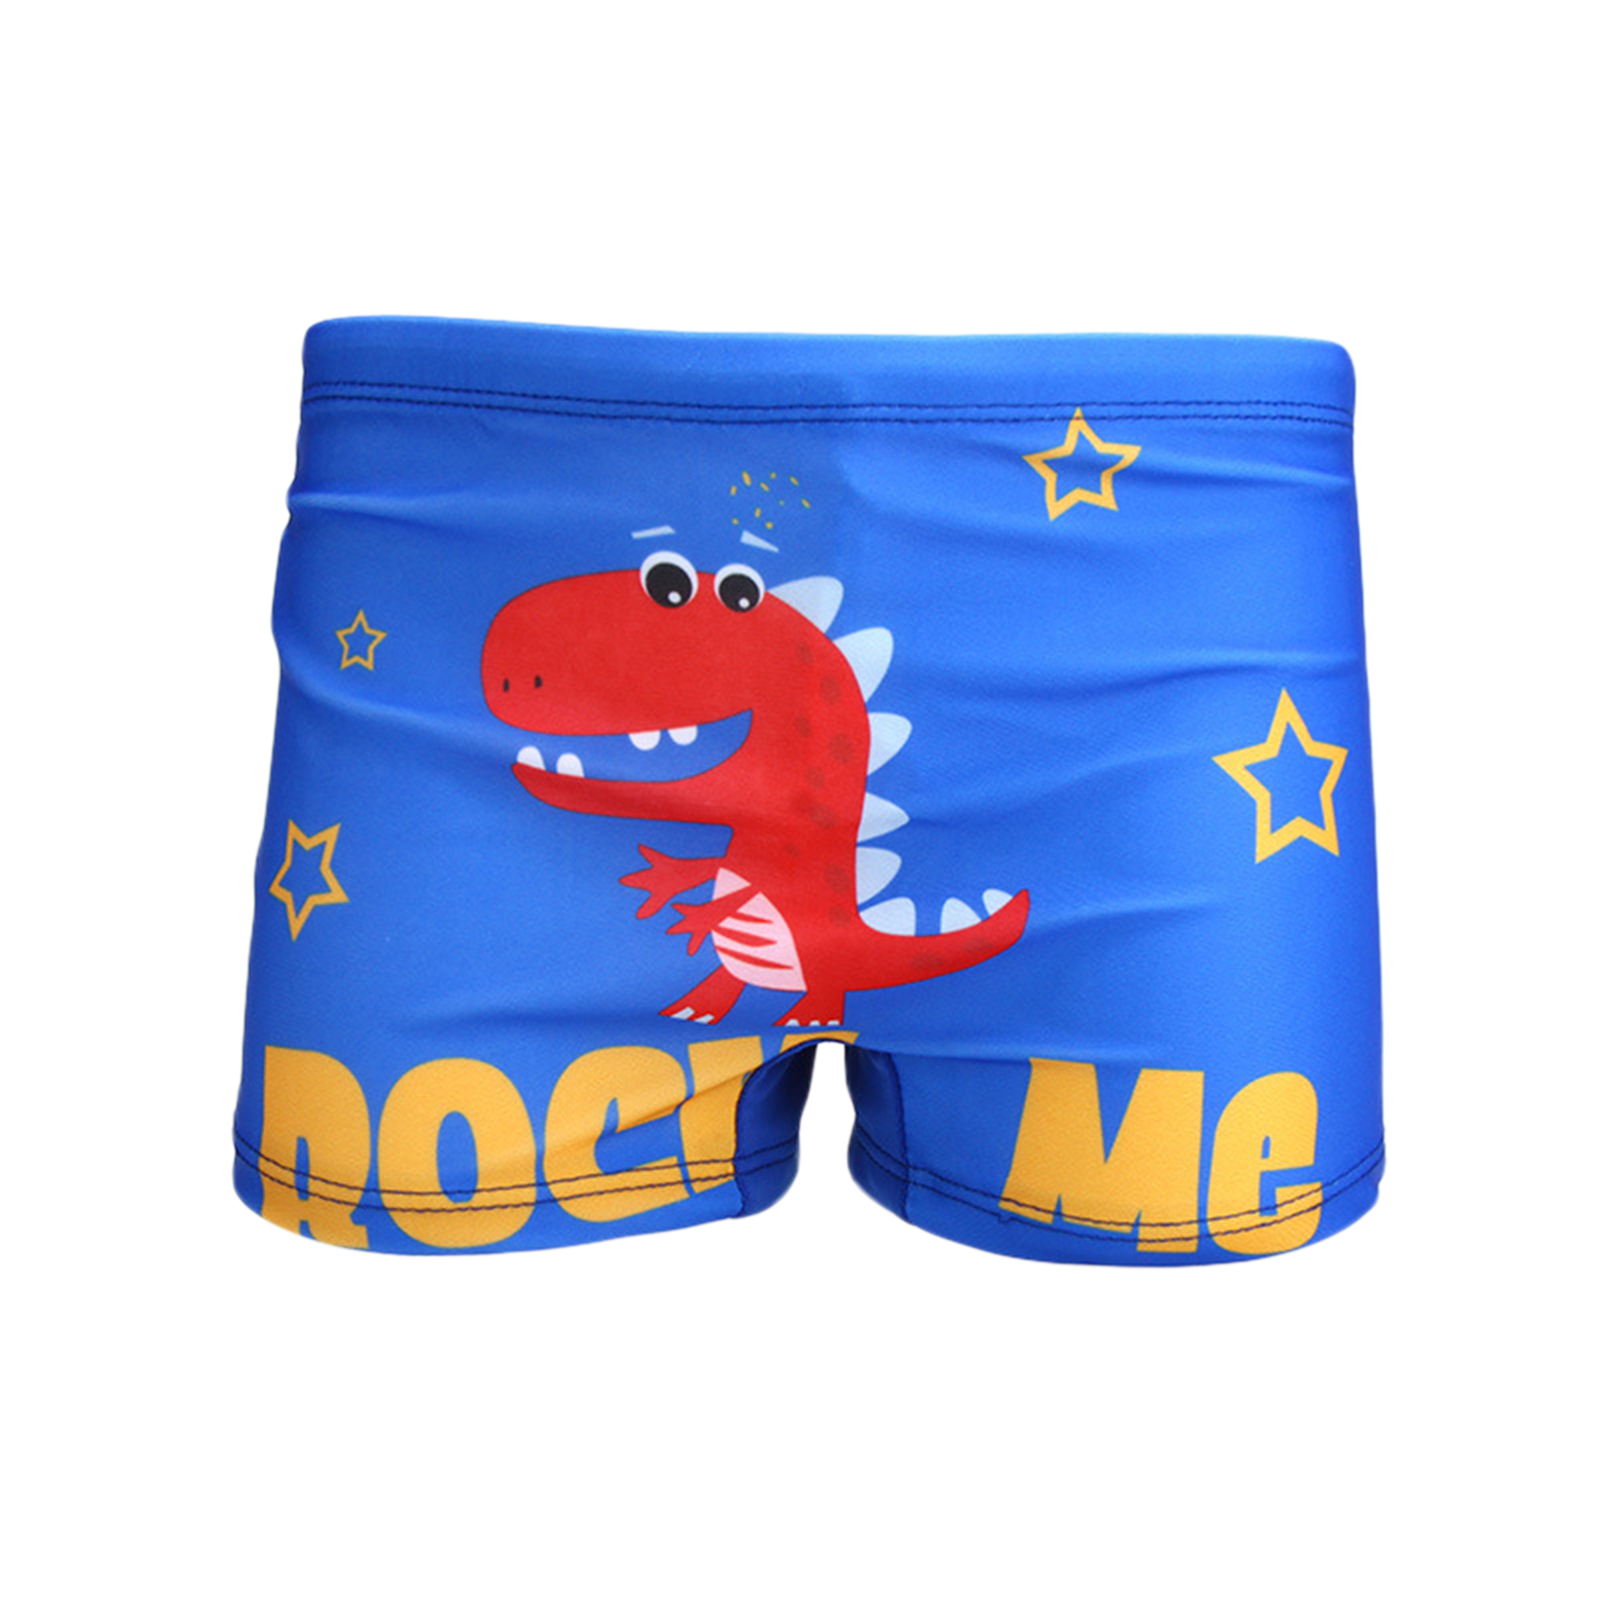 Kids Cartoon Casual Swim Shorts For Beach Vacation Swimming Trunks Bathing Suit For 2-8 Years Old red dinosaur 7-8Y XXL